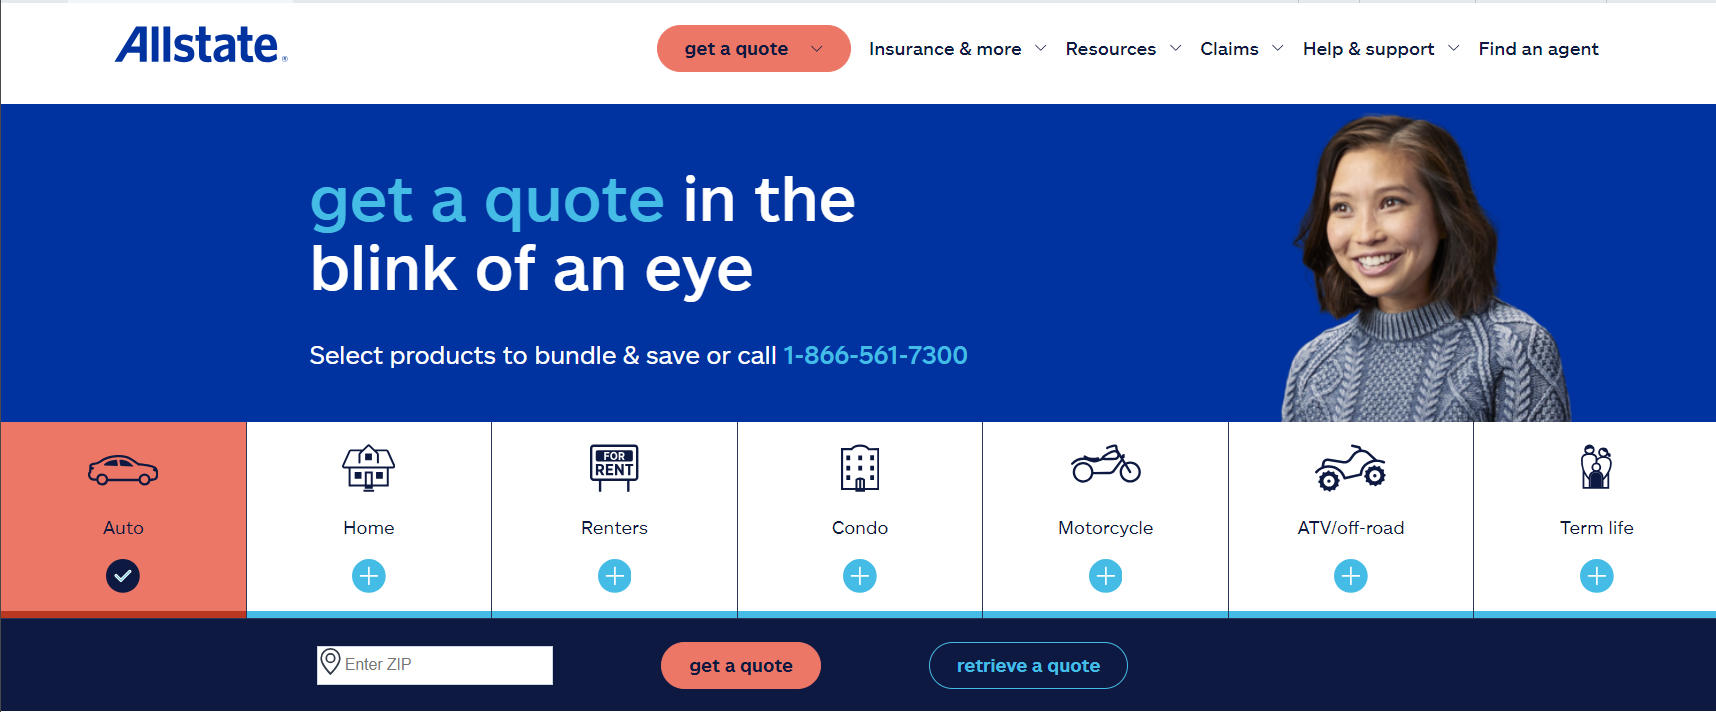 Allstate Site Screenshot: 10 Best Companies for Bundling Home and Car Insurance